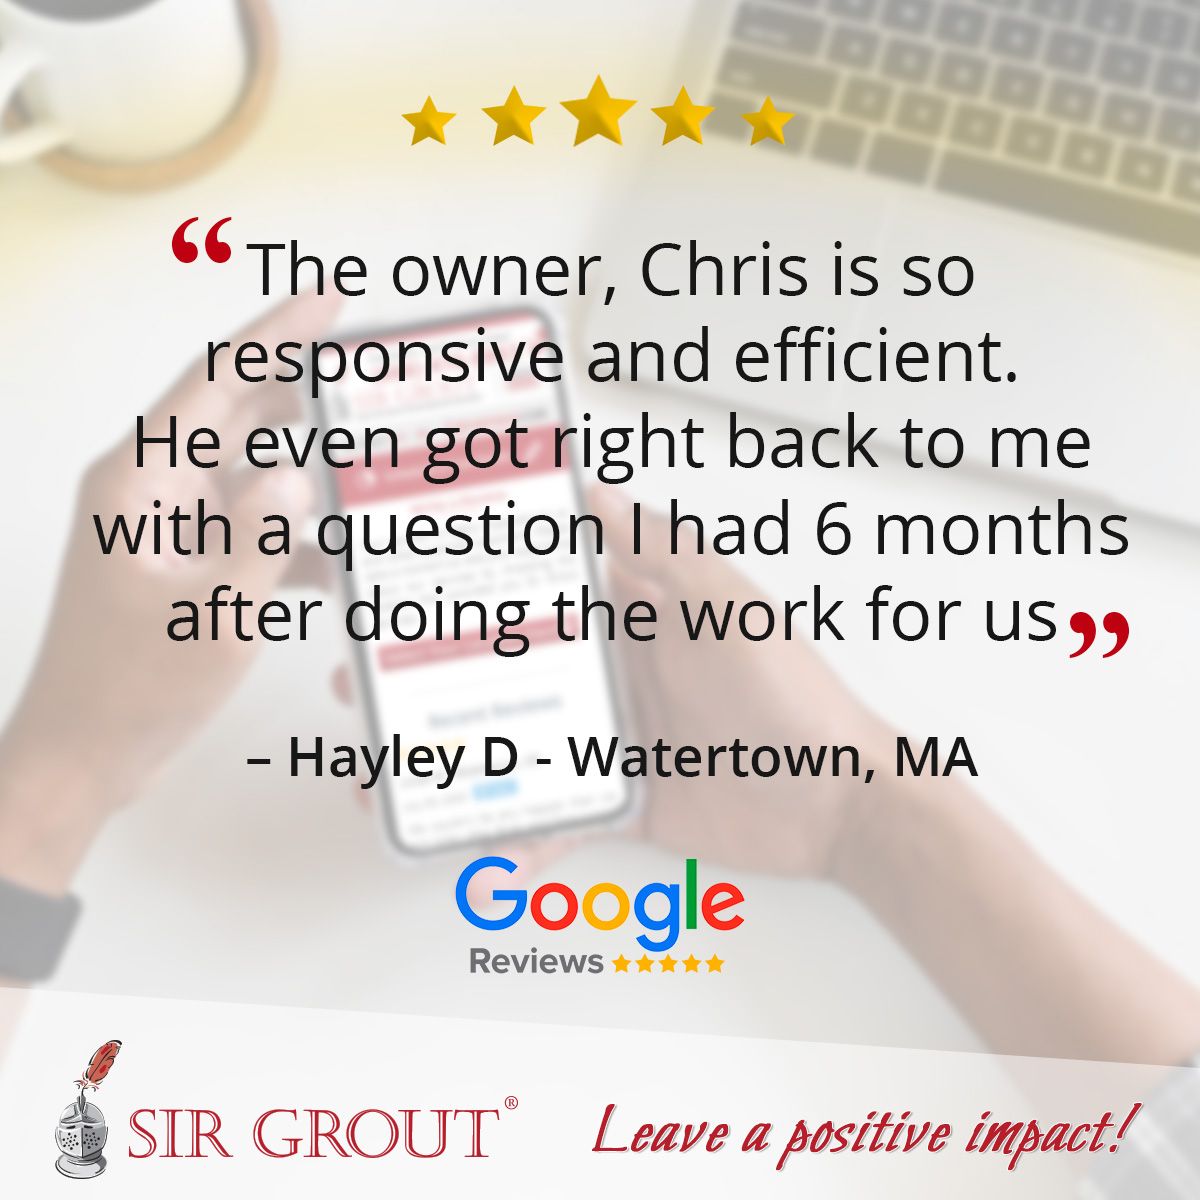 The owner, Chris is so responsive and efficient. He even got right back to me with a question I had 6 months after doing the work for us